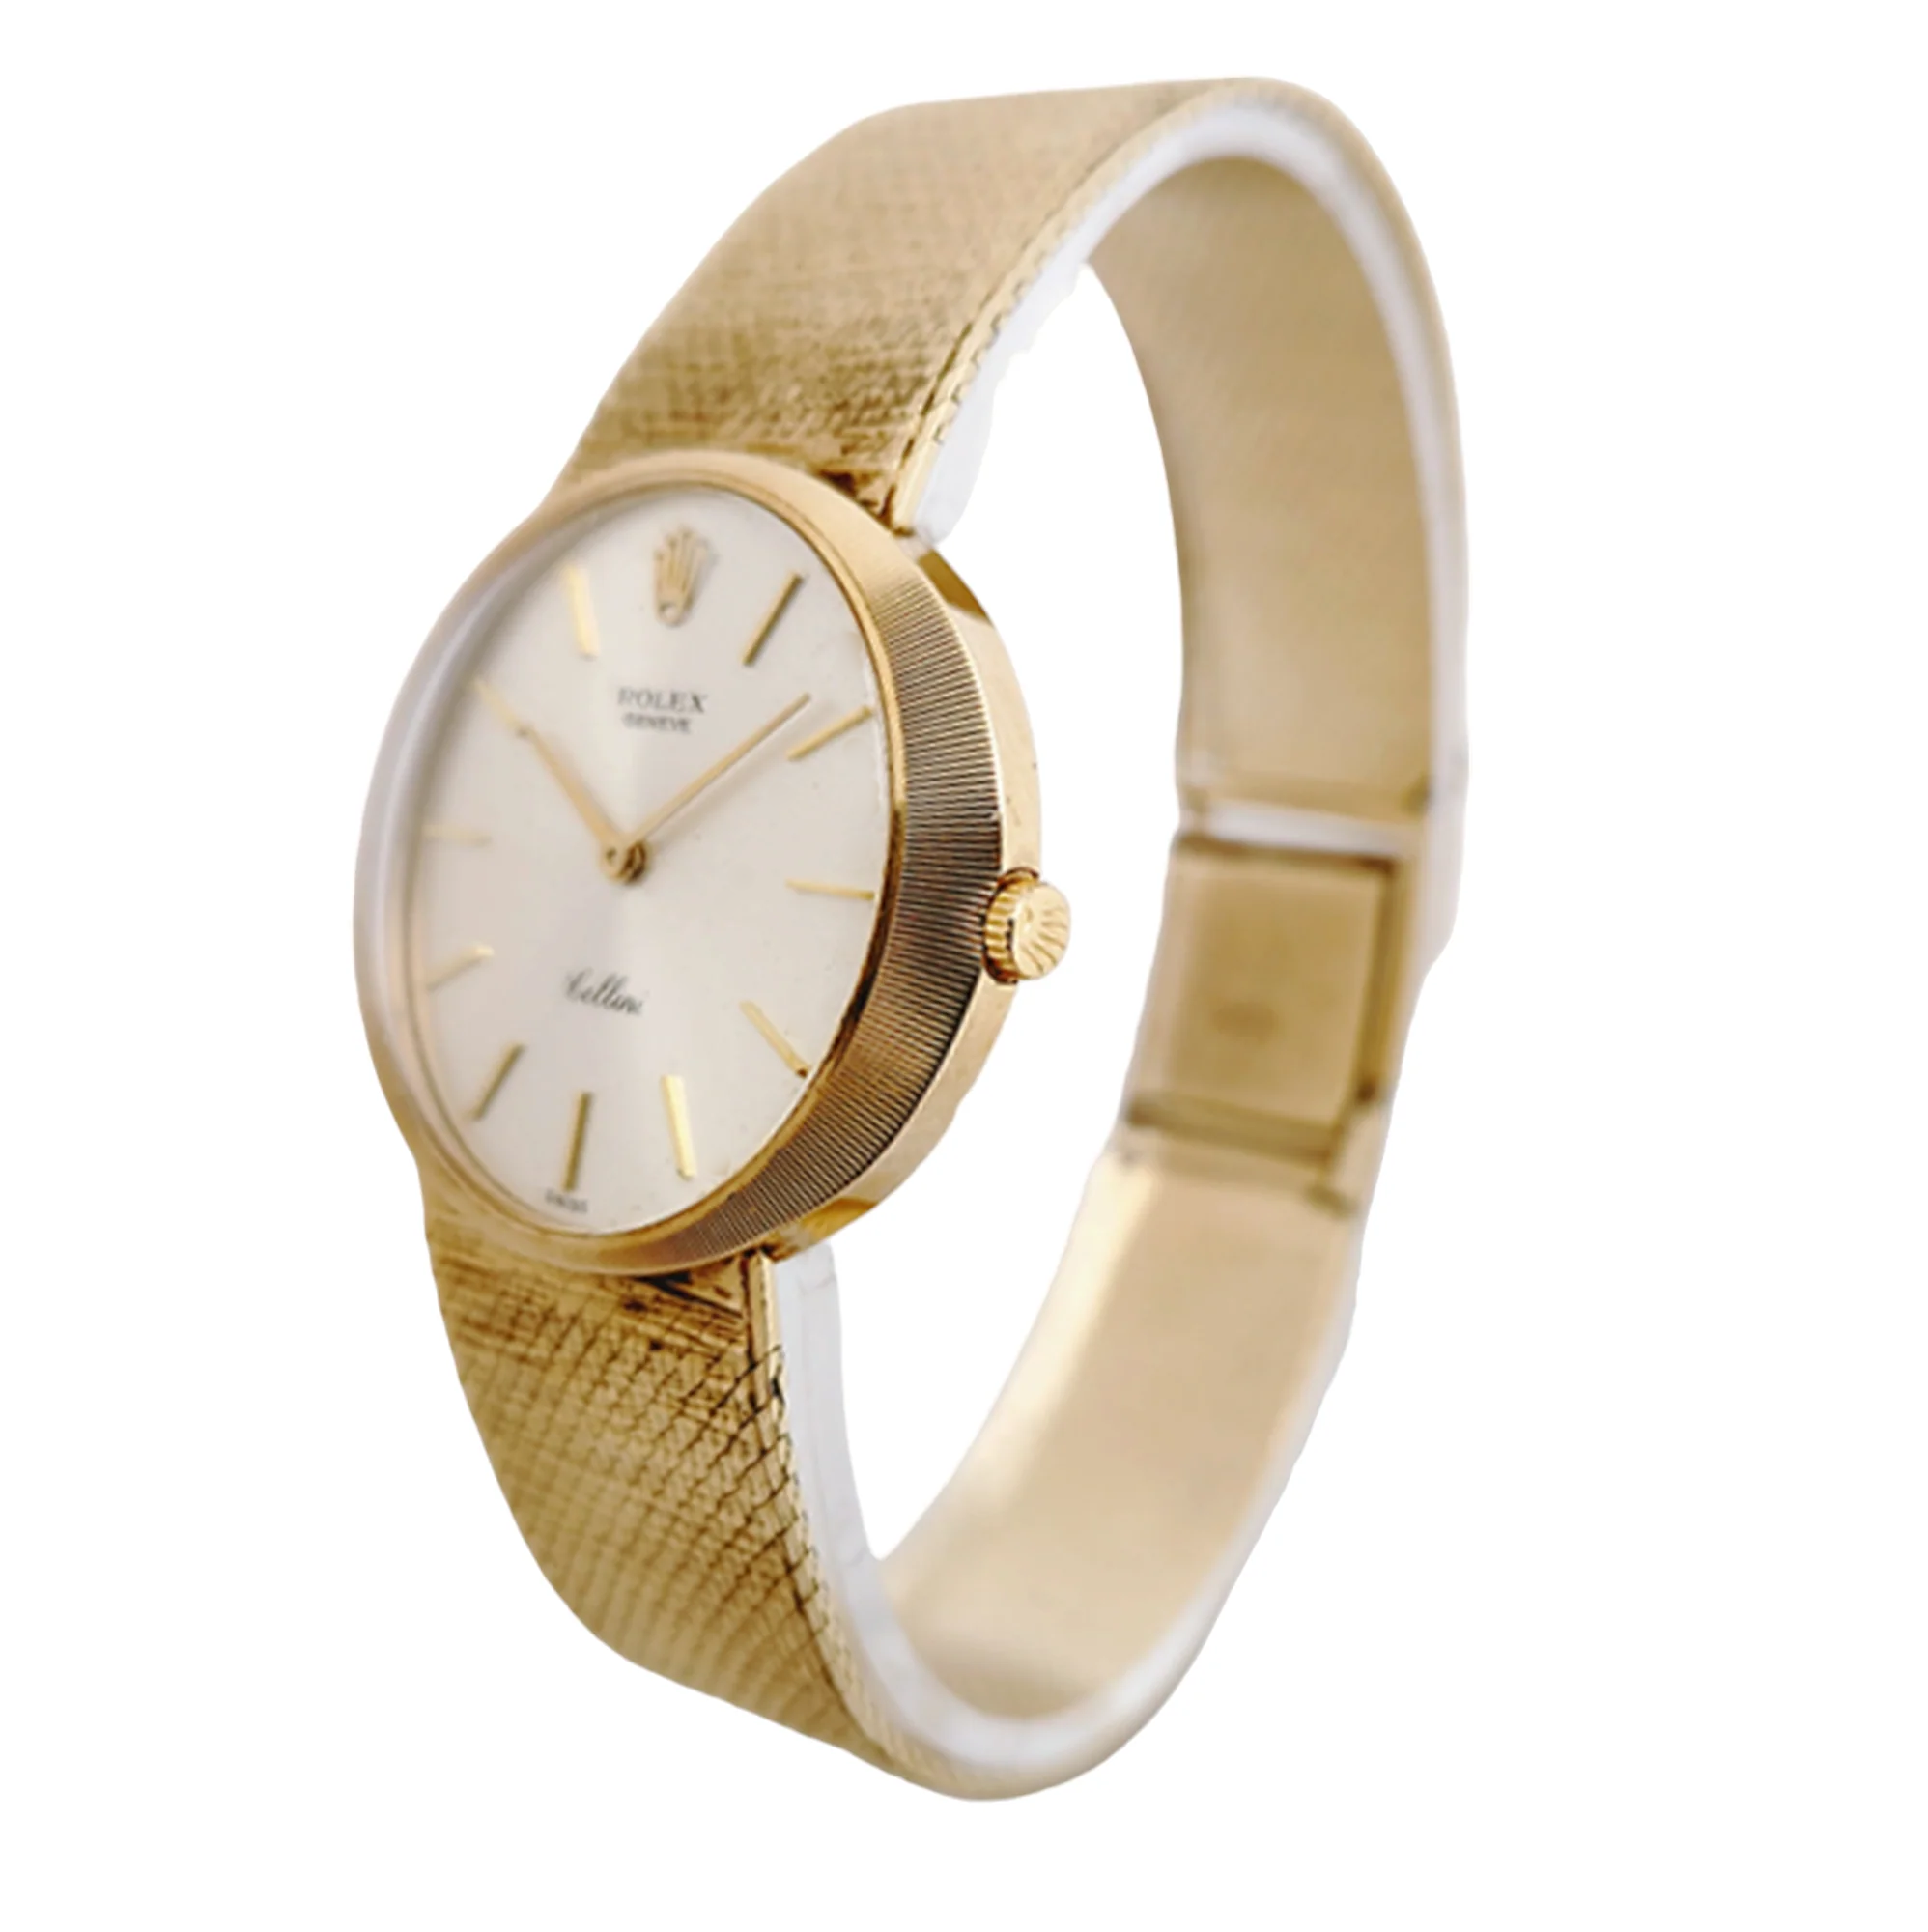 *Unisex Rolex Cellini Vintage 14K Yellow Gold Watch with Light Champagne Dial and Smooth Bezel. (Pre-Owned)